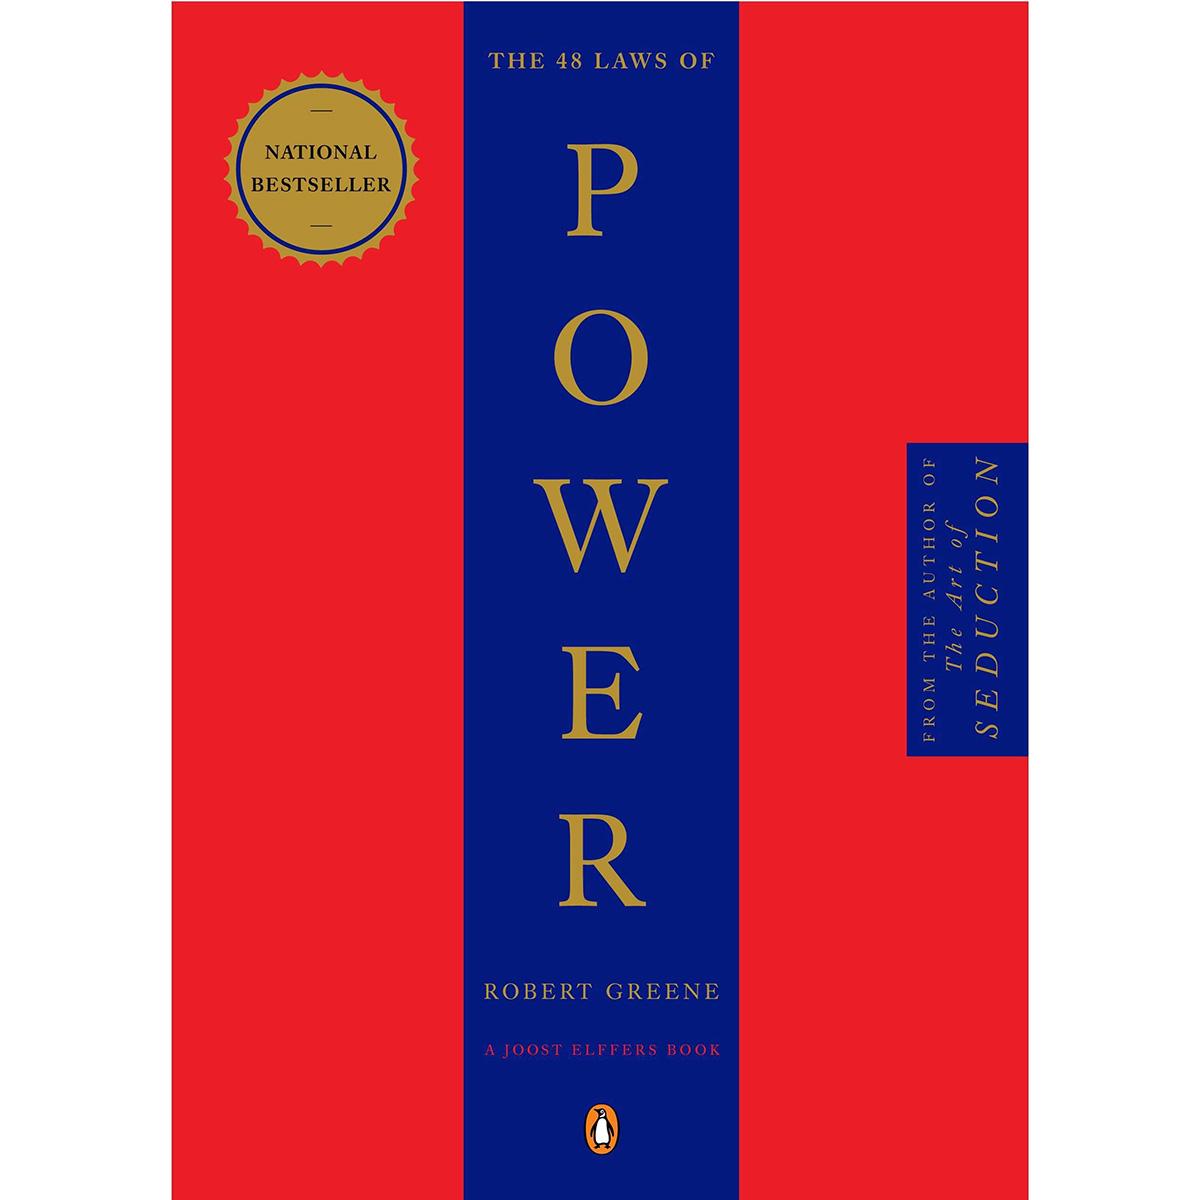 The 48 Laws of Power eBook for $1.99